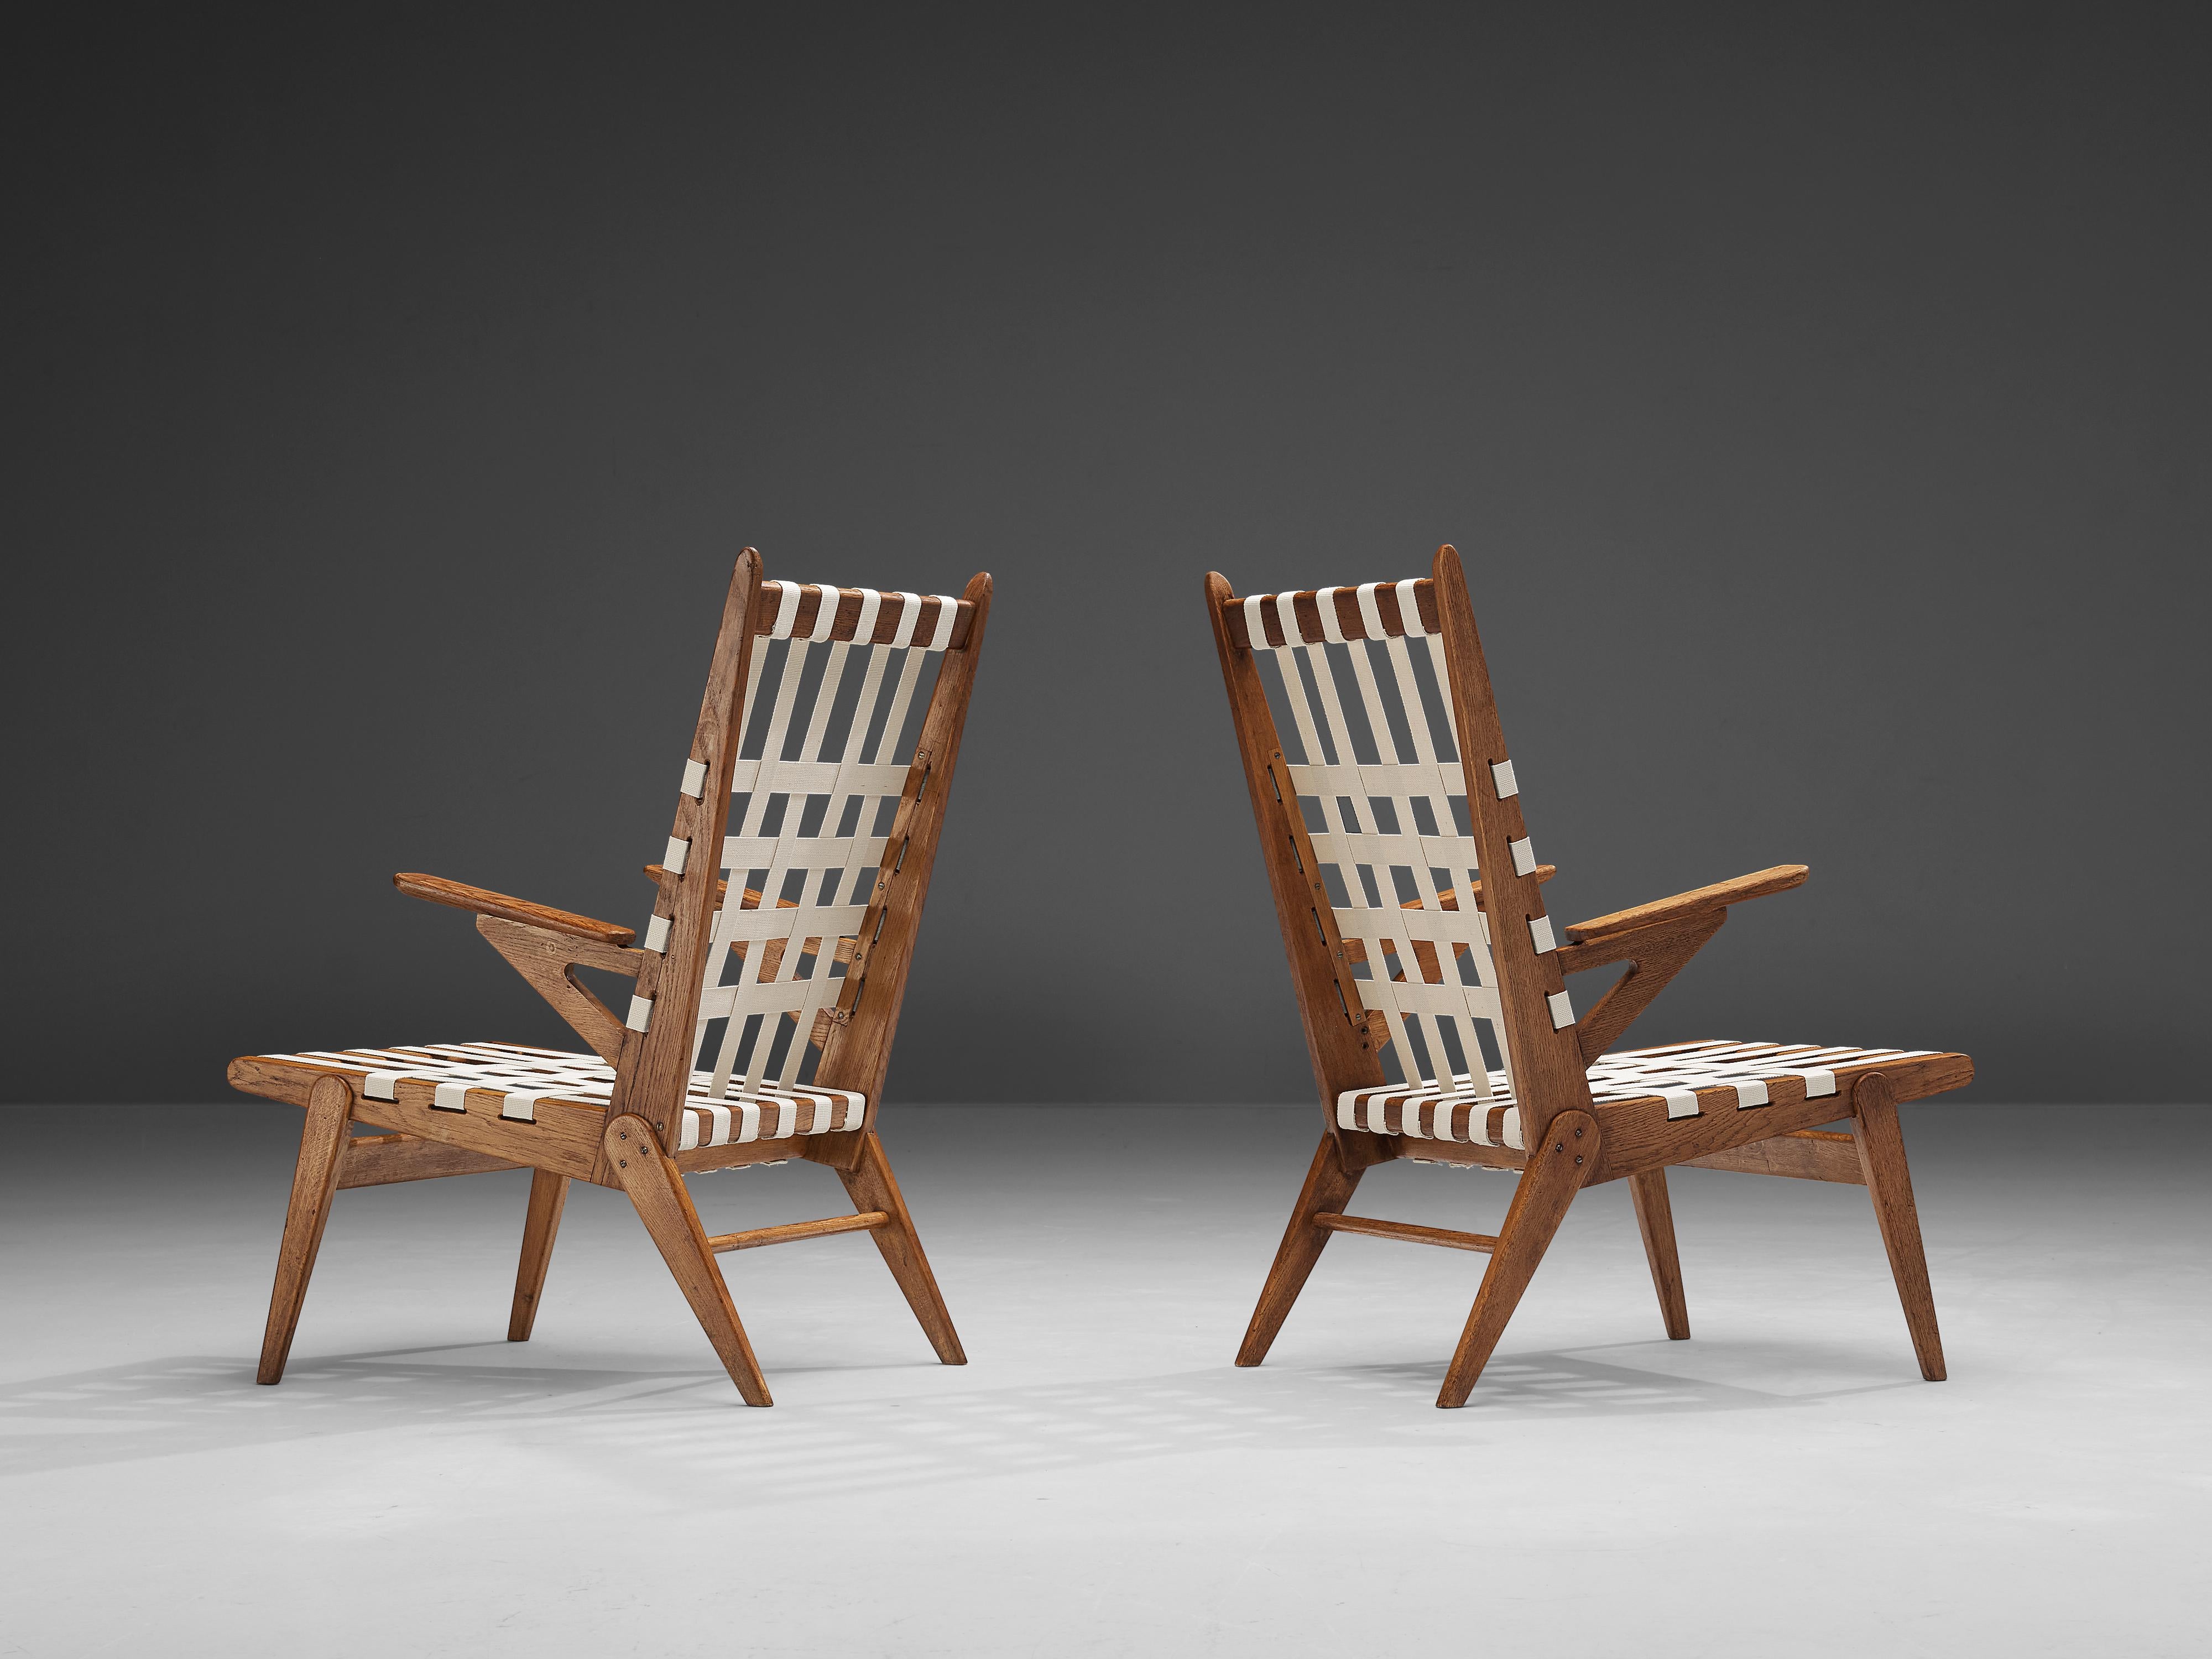 Jan Vaněk for Krásná Jizba, pair of lounge chairs, oak, canvas, metal, Czech Republic, 1940s 

These armchairs by Jan Vaněk are characterized by a construction of sharp lines and clear shapes. Multiple details, like the pointy ends of the backrest